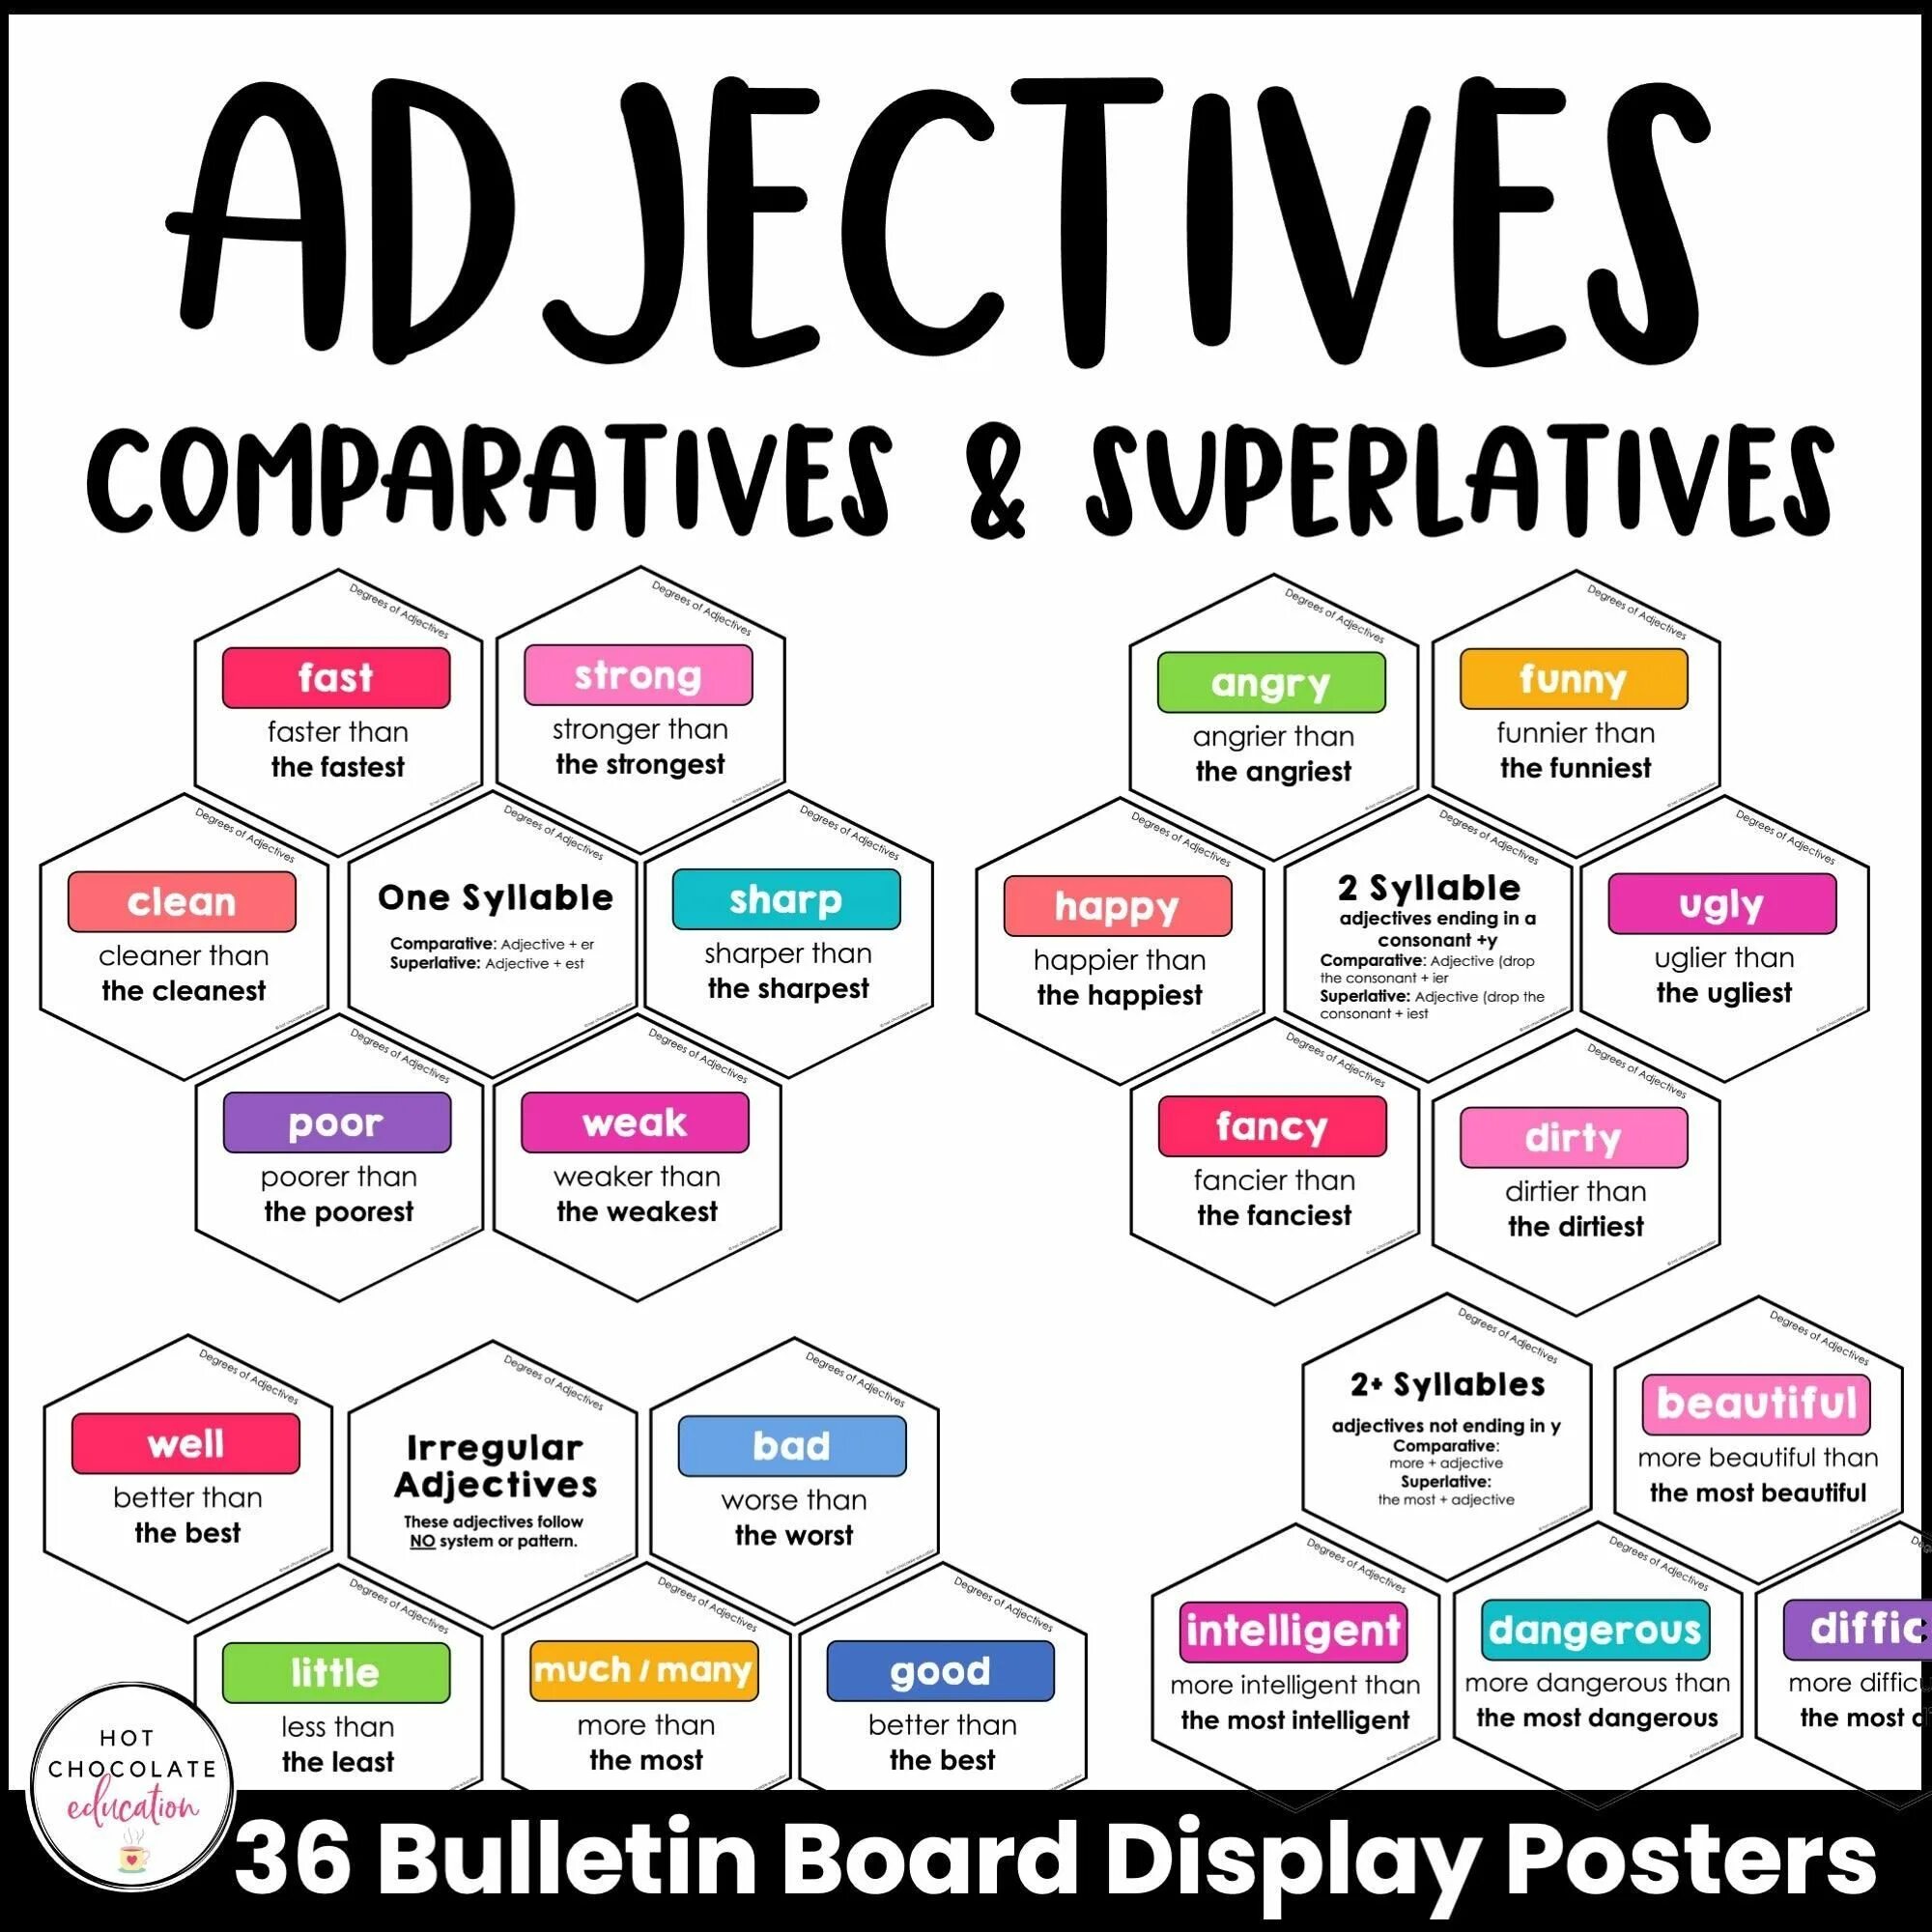 Comparatives and superlatives games. Comparatives and Superlatives Board game. Superlative adjectives Board game. Degrees of Comparison Board game. Comparative and Superlative adjectives boardgame.